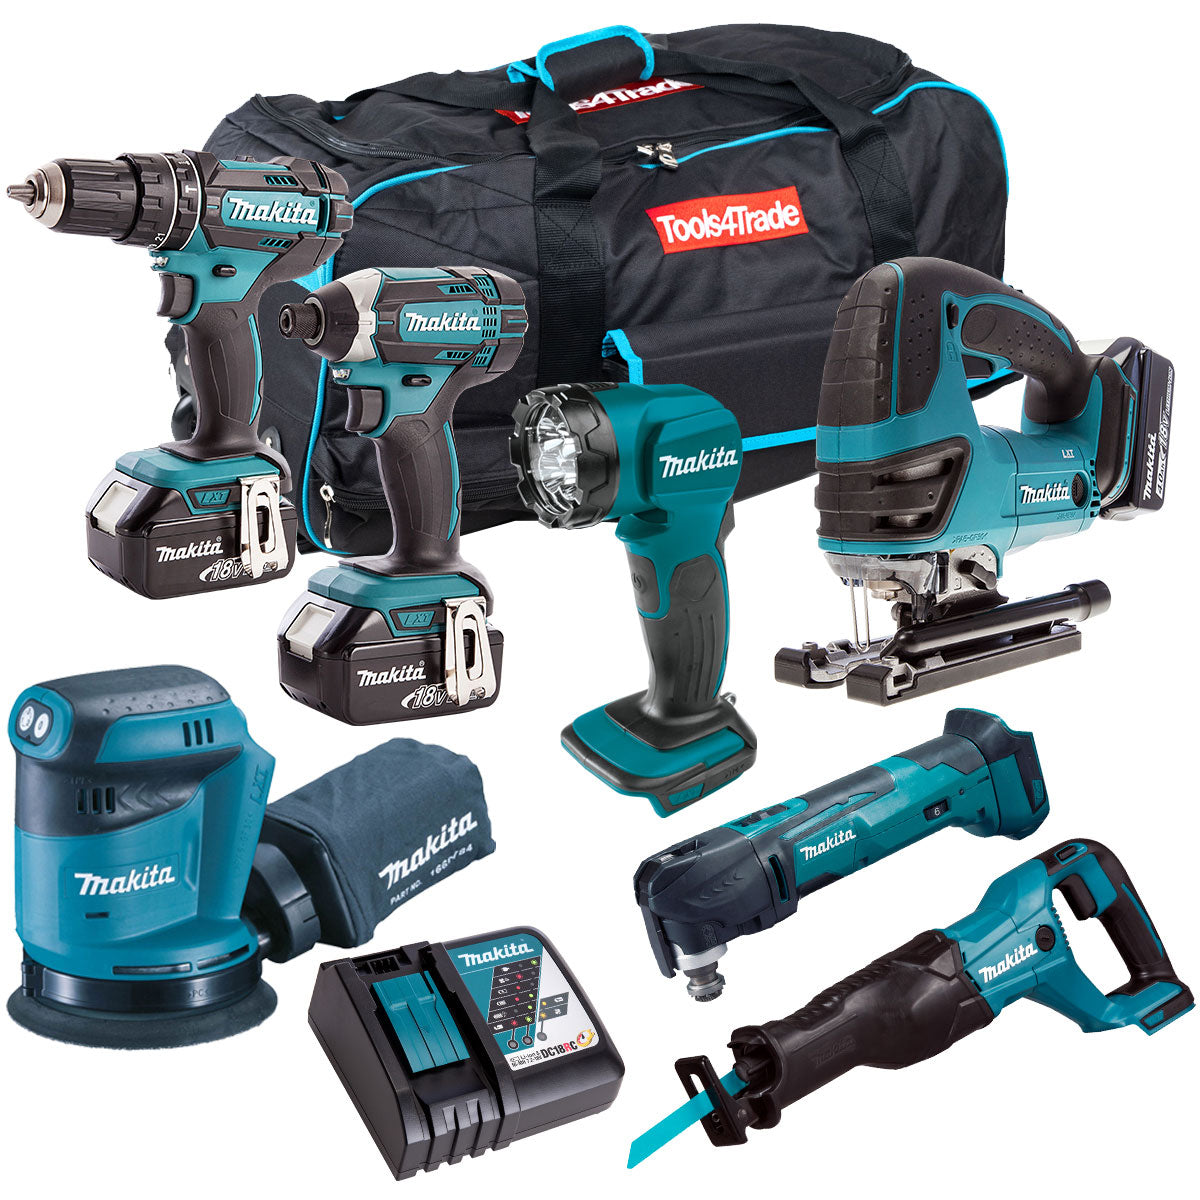 Makita 18V 7 Piece Power Tool Kit with 3 x 5.0Ah Batteries & Charger T4TKIT-321